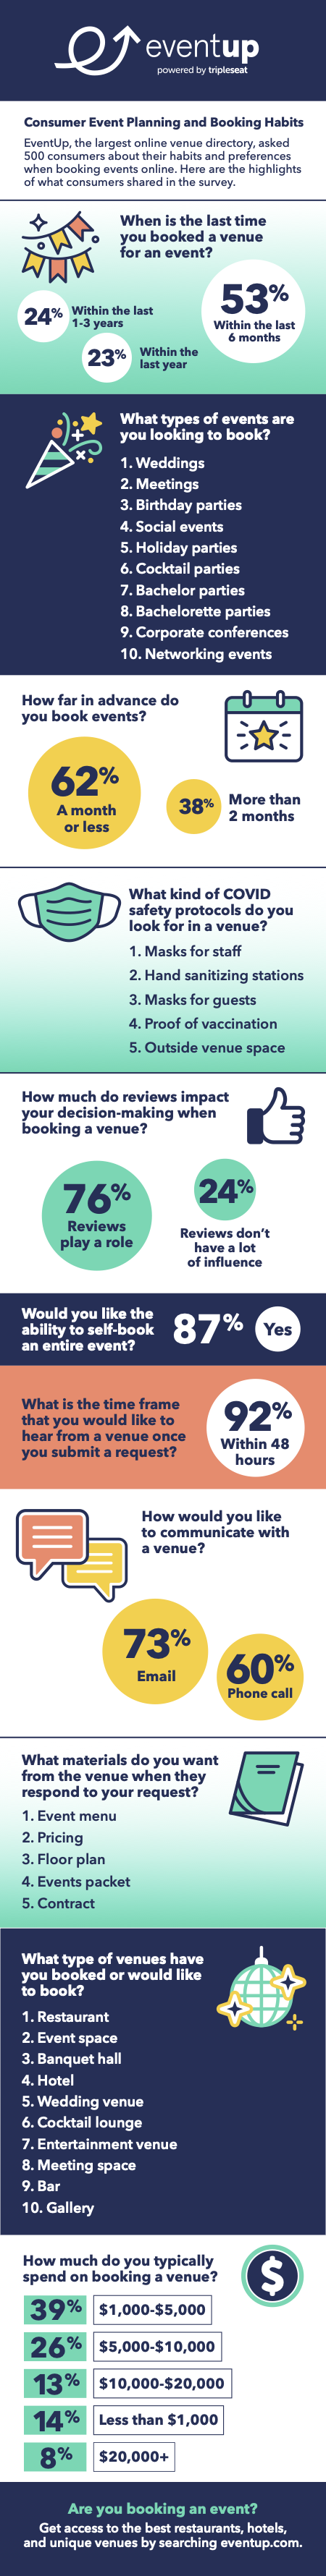 EventUp Infographic Consumers Reveal Event Booking Habits and Preferences